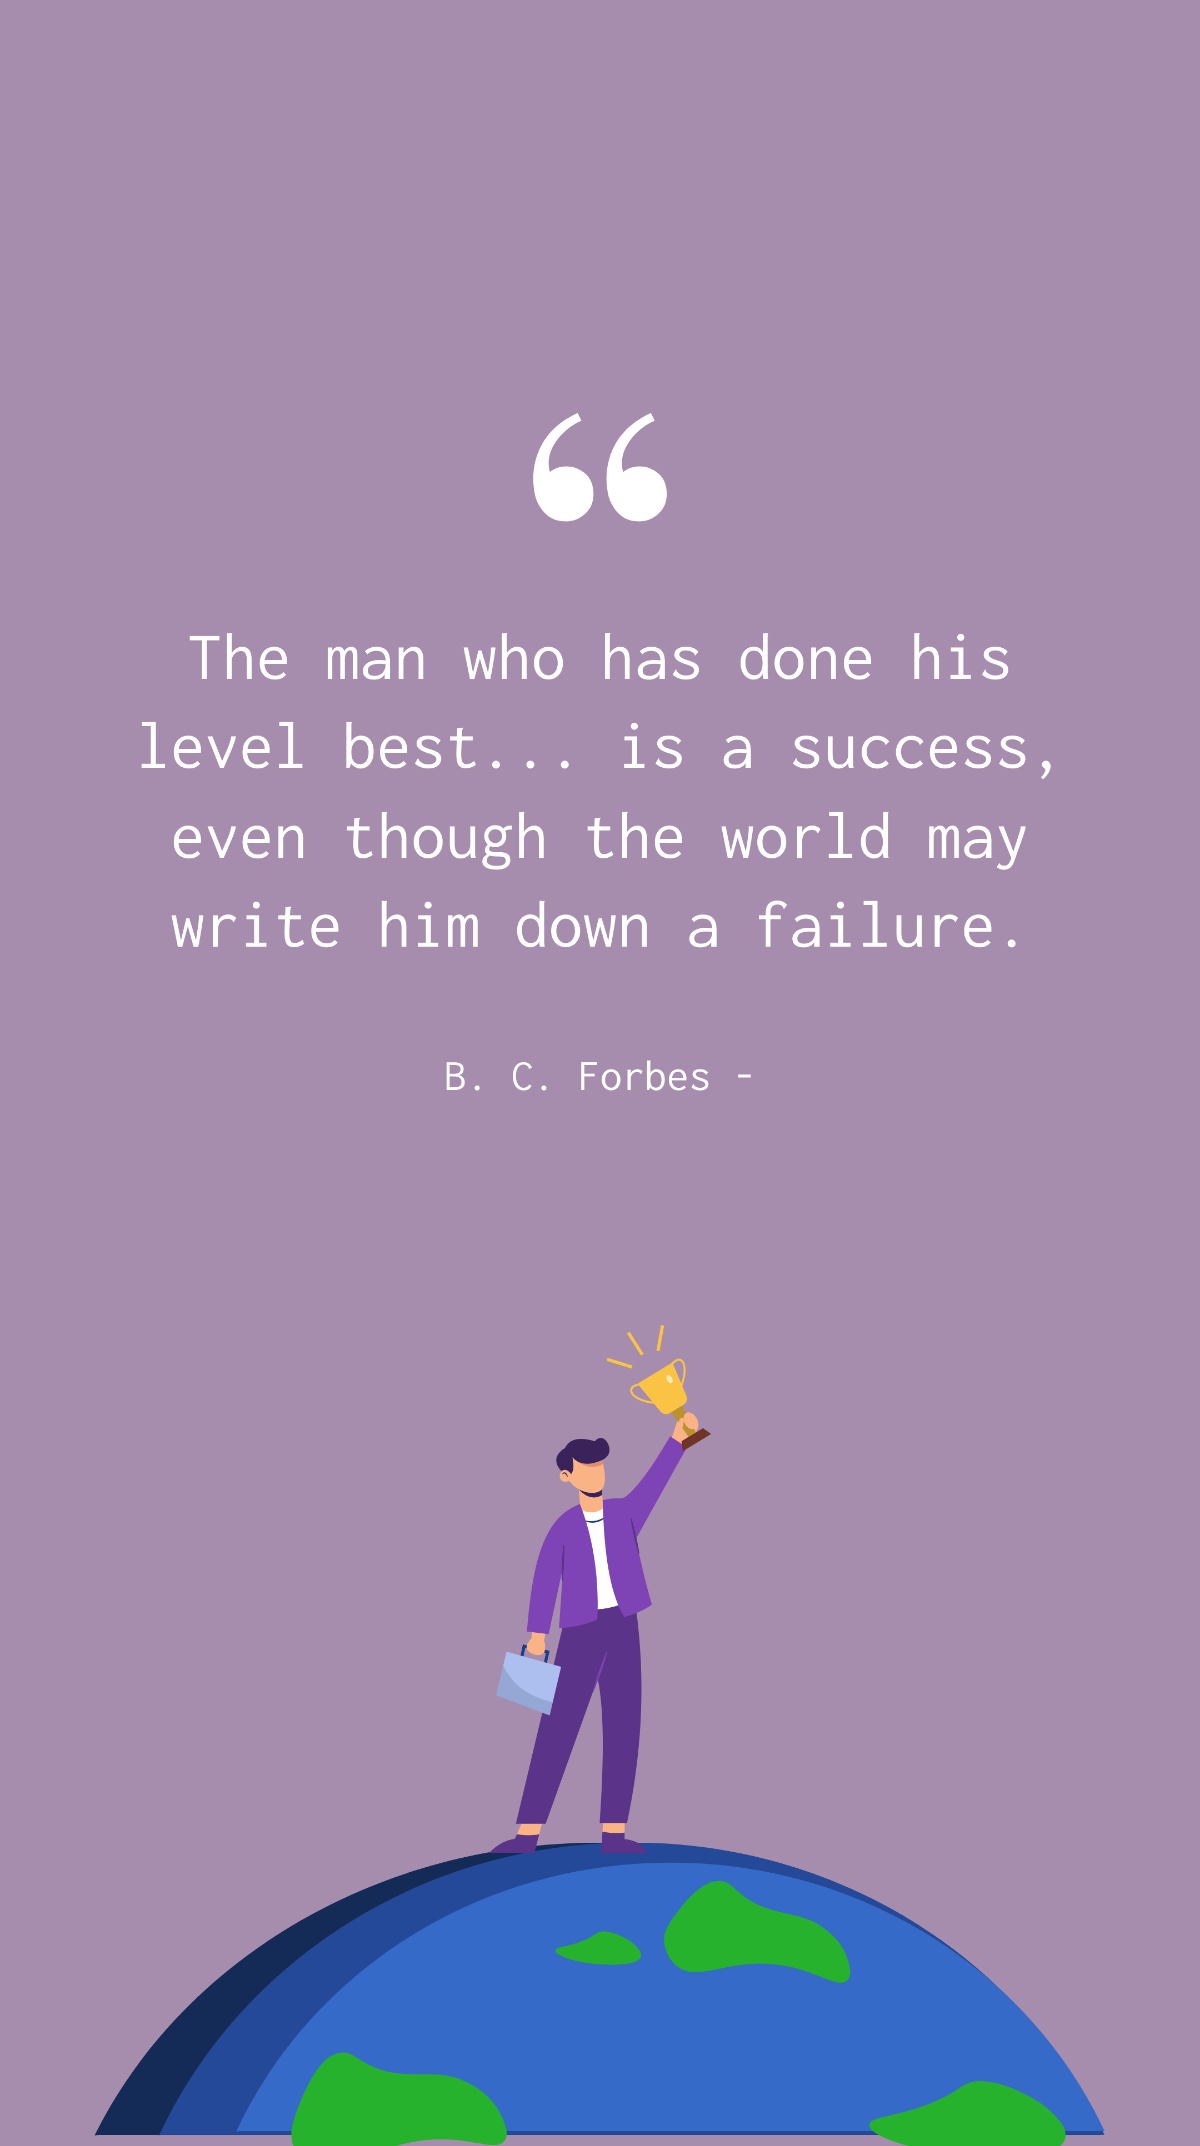 Free B. C. Forbes - The man who has done his level best... is a success, even though the world may write him down a failure. Template